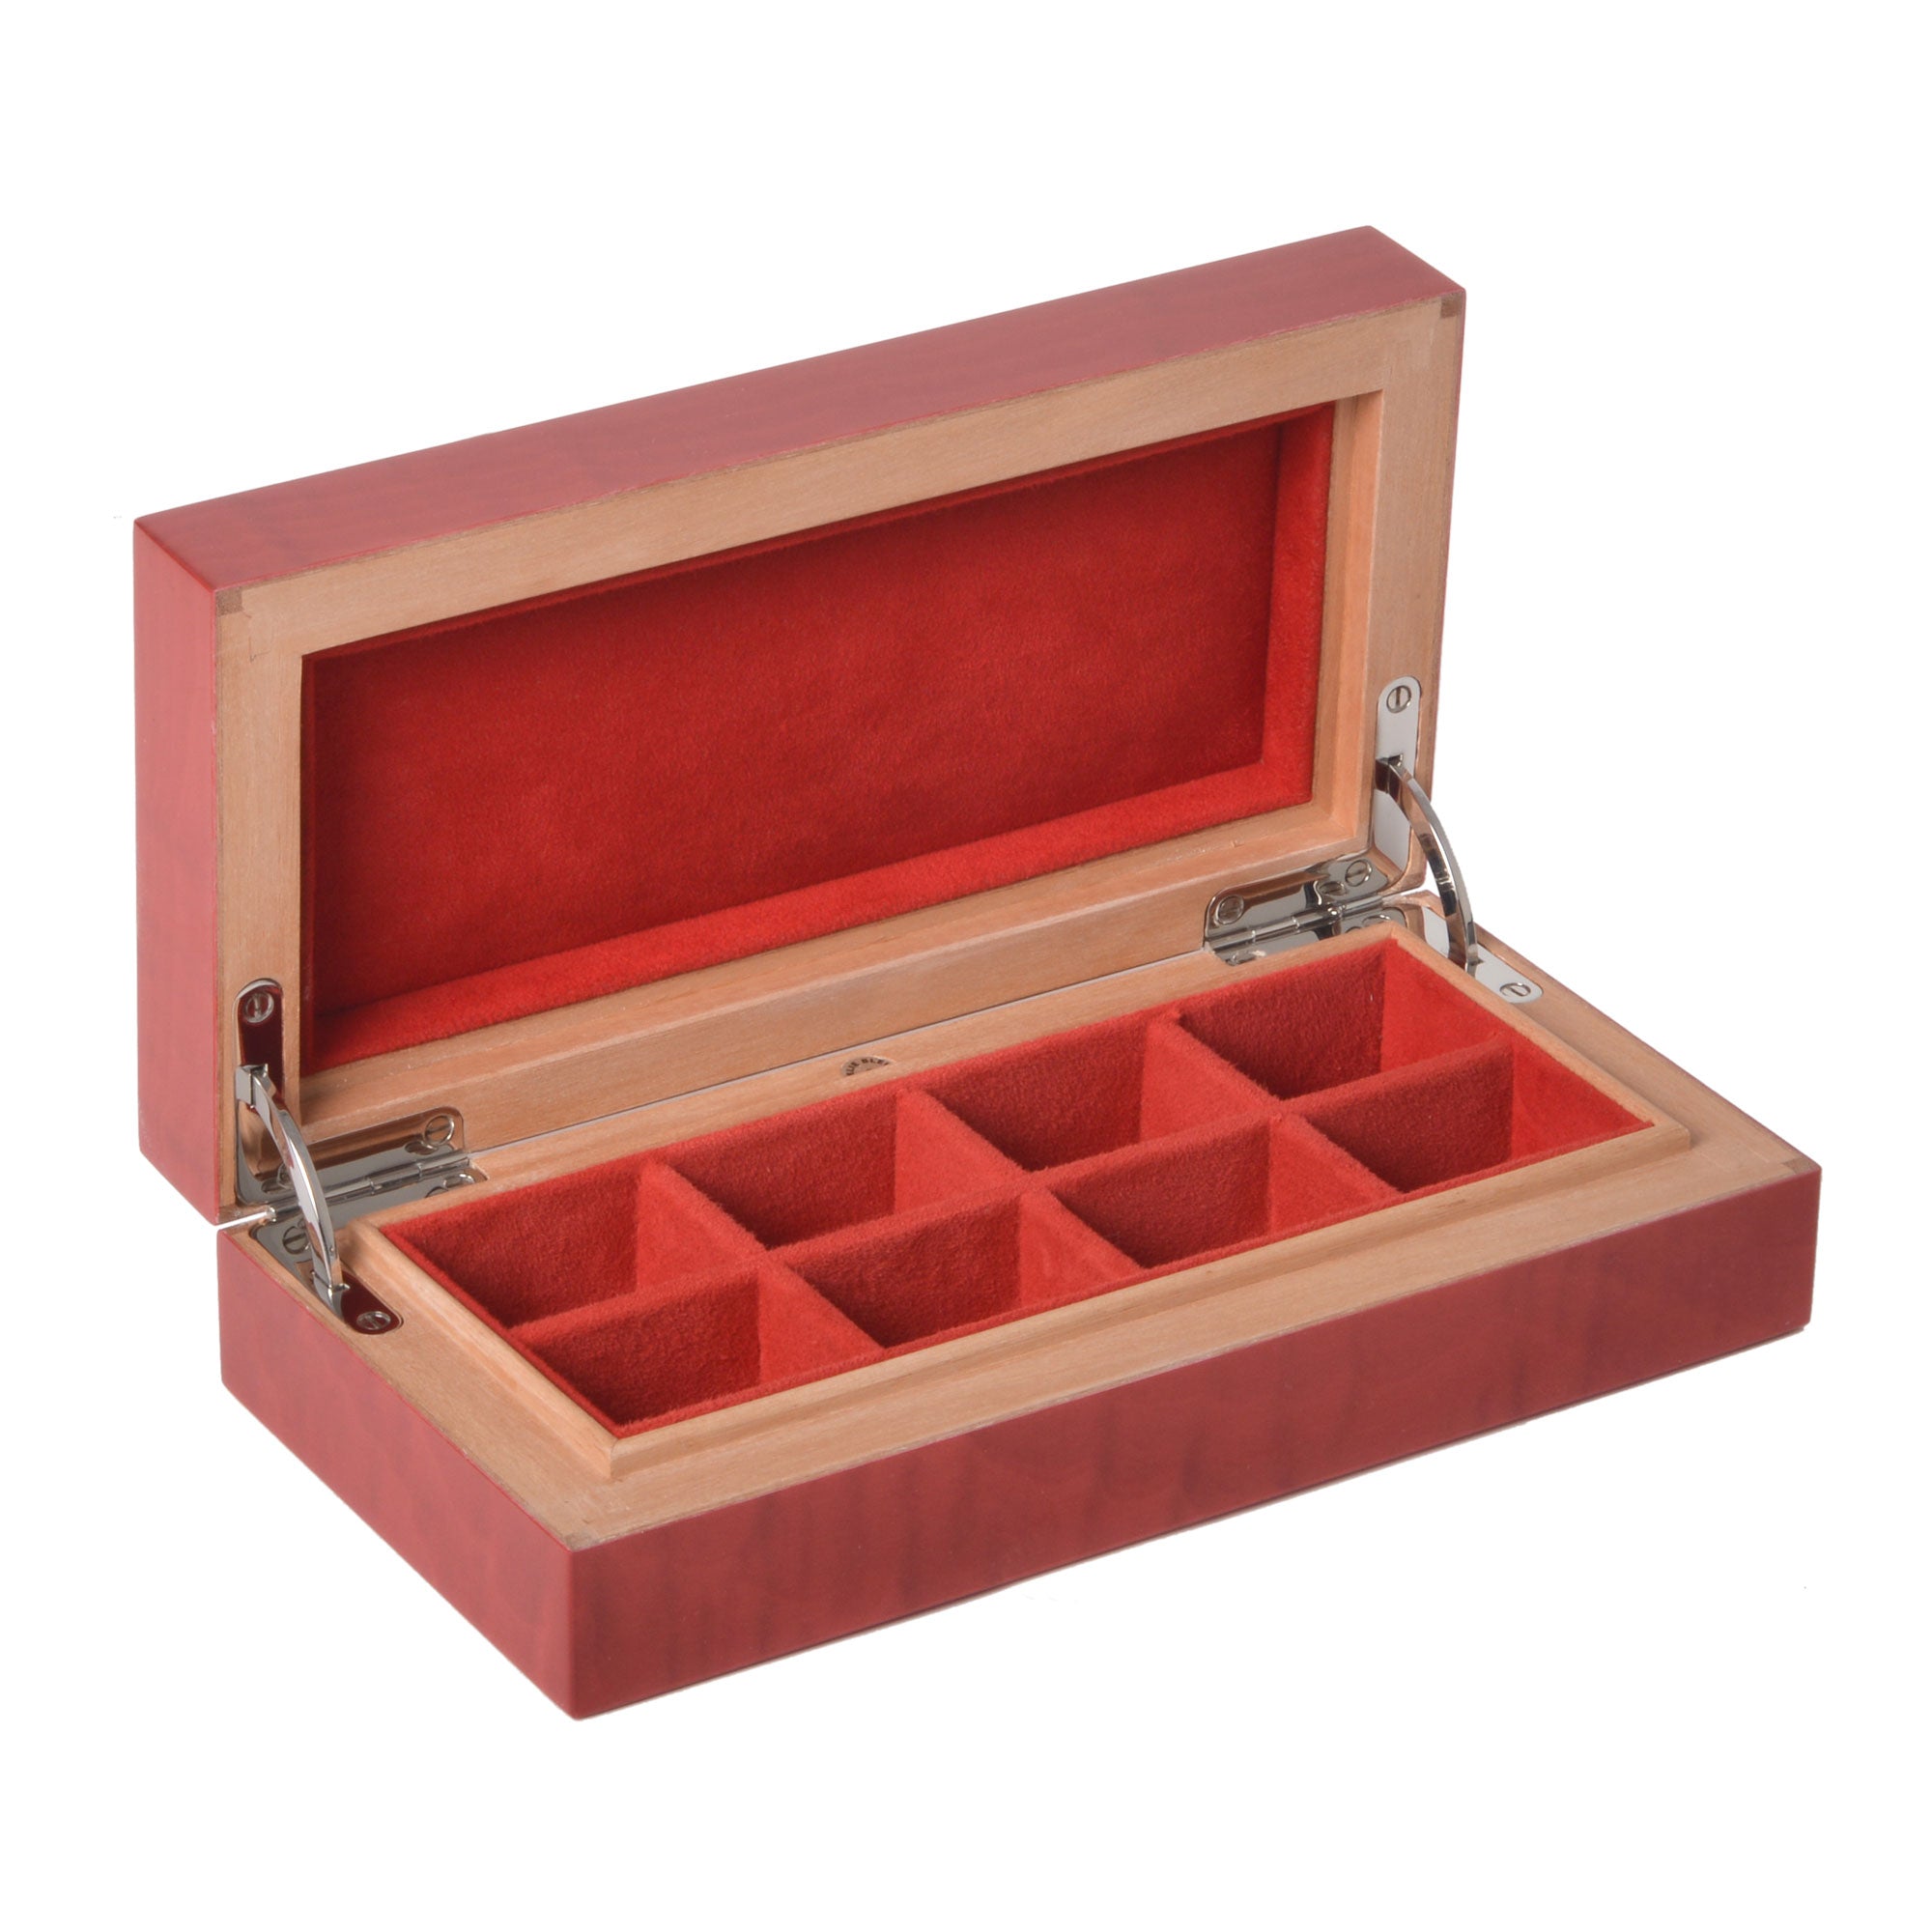 "Fruit" - Box for 8 rings or 8 pairs of cufflinks